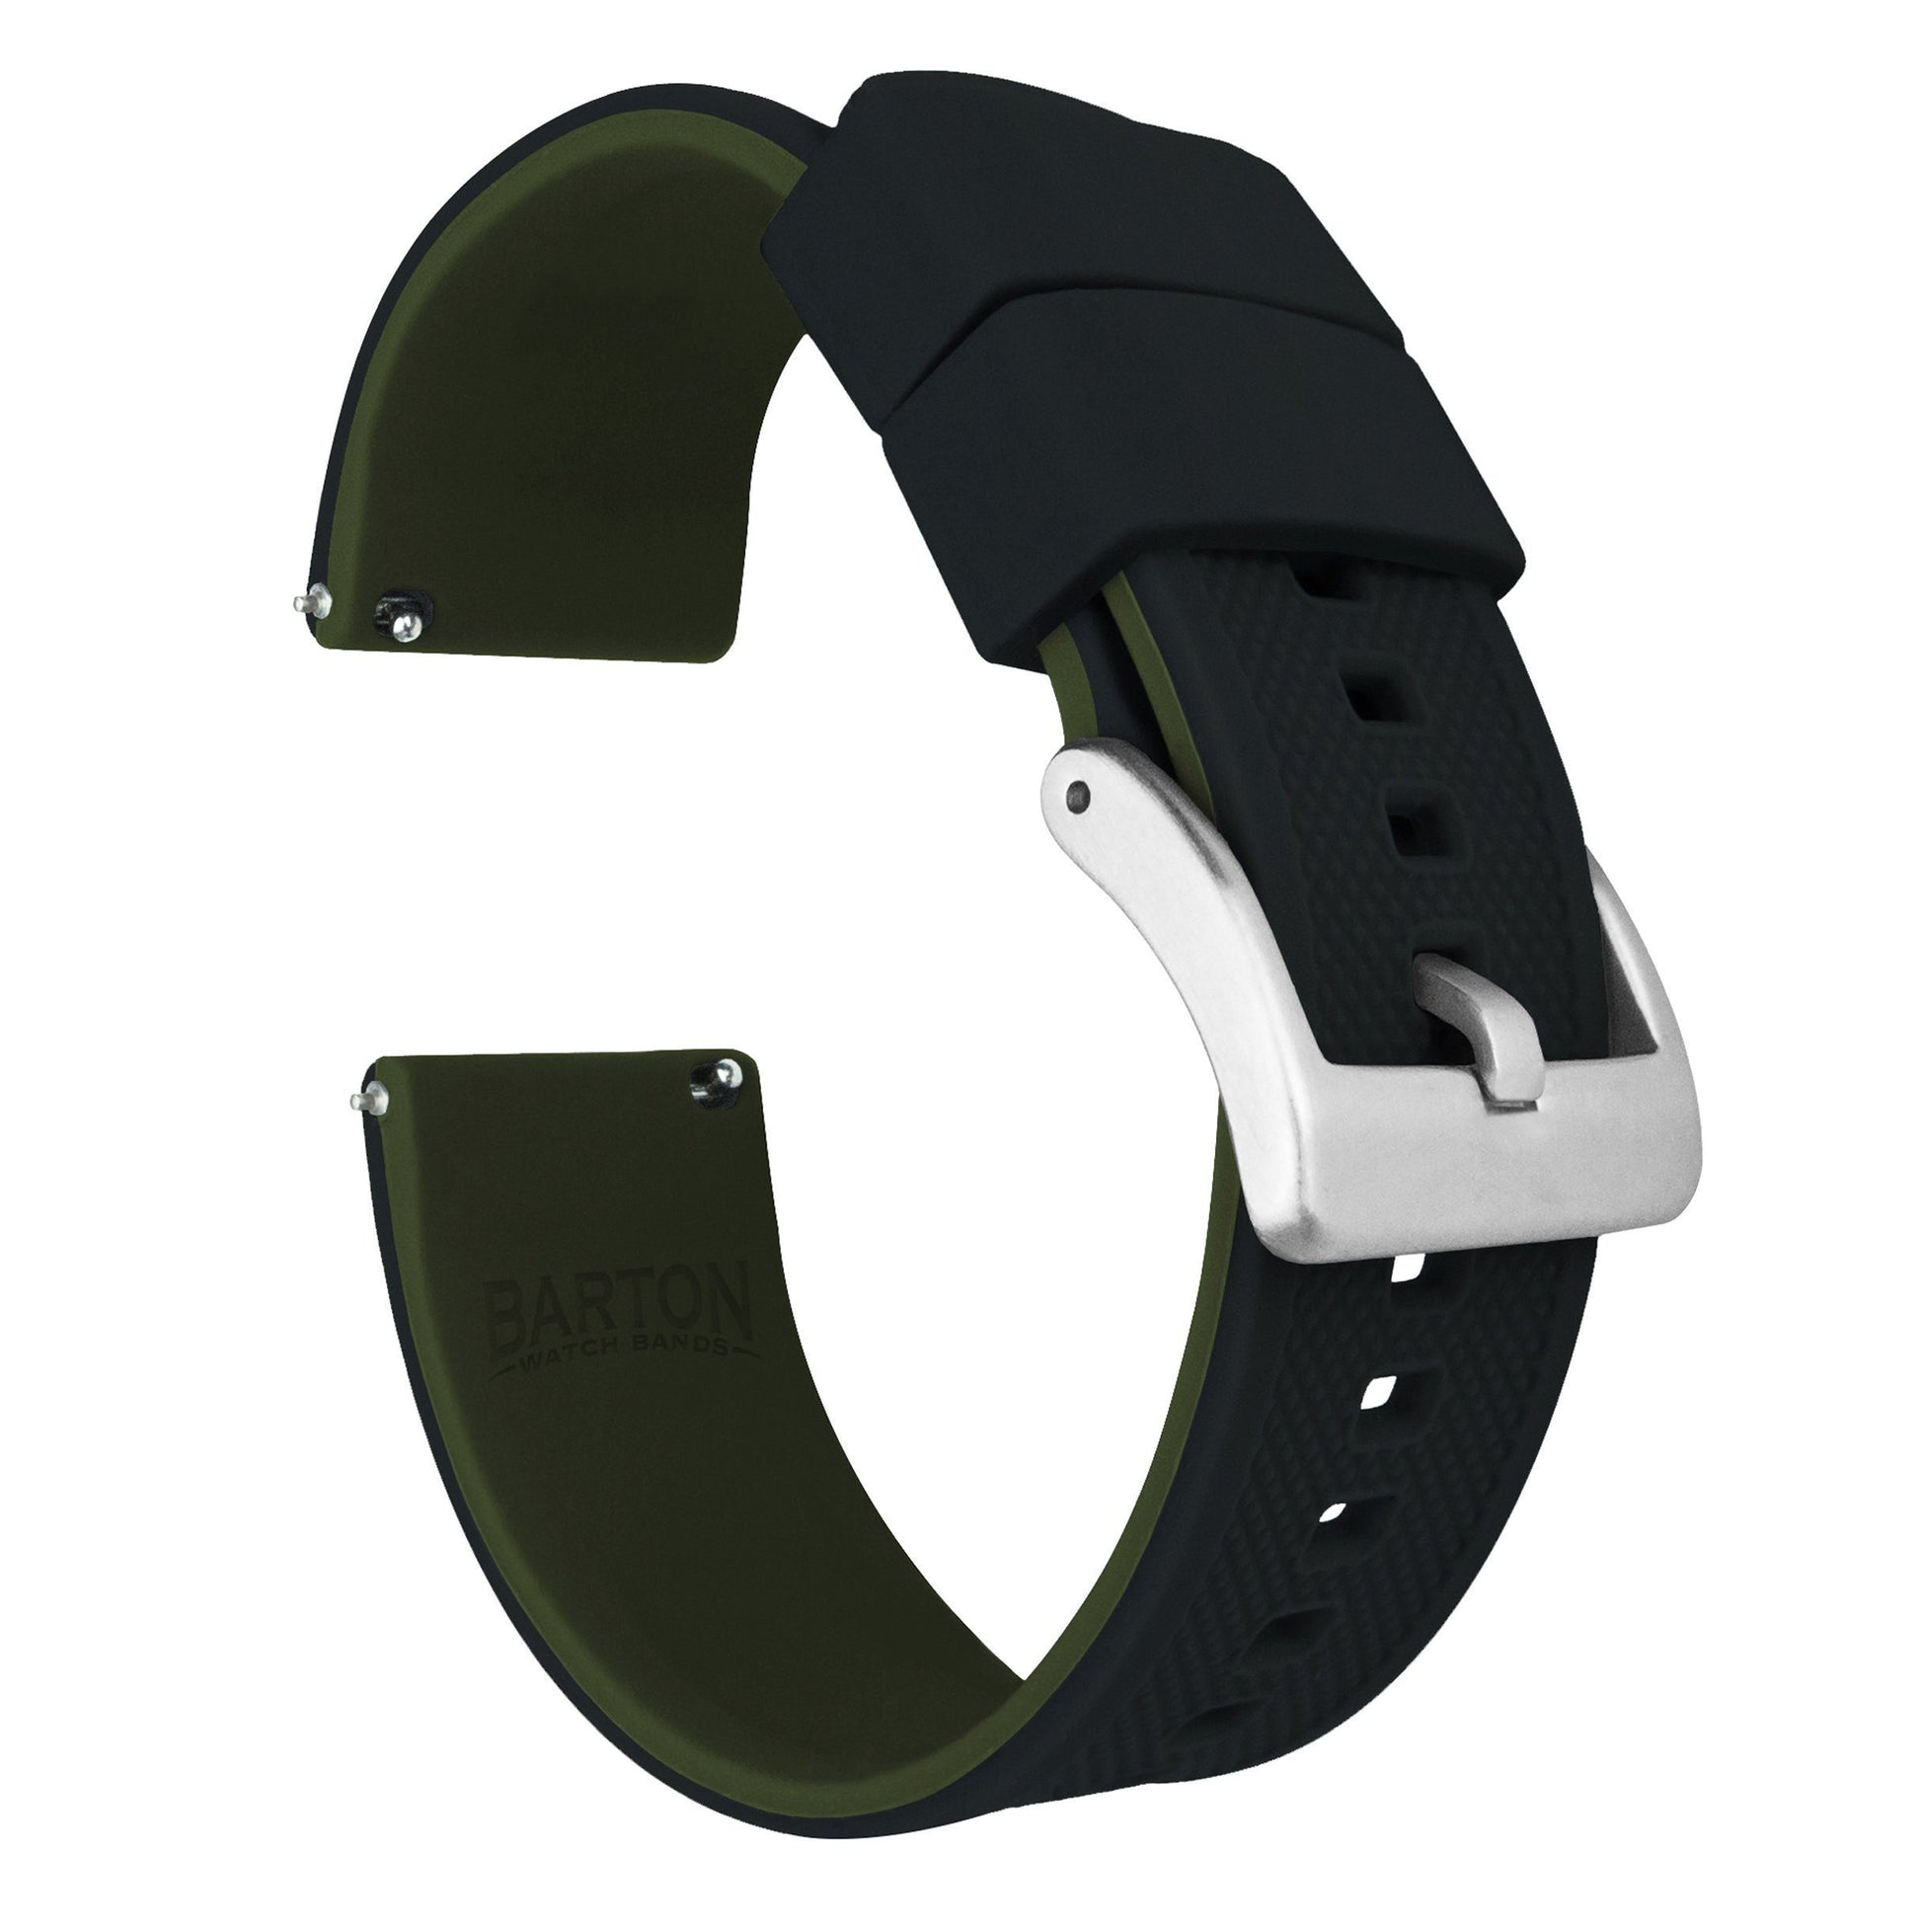 Pebble Smart Watches | Elite Silicone | Black Top / Army Green Bottom - Barton Watch Bands